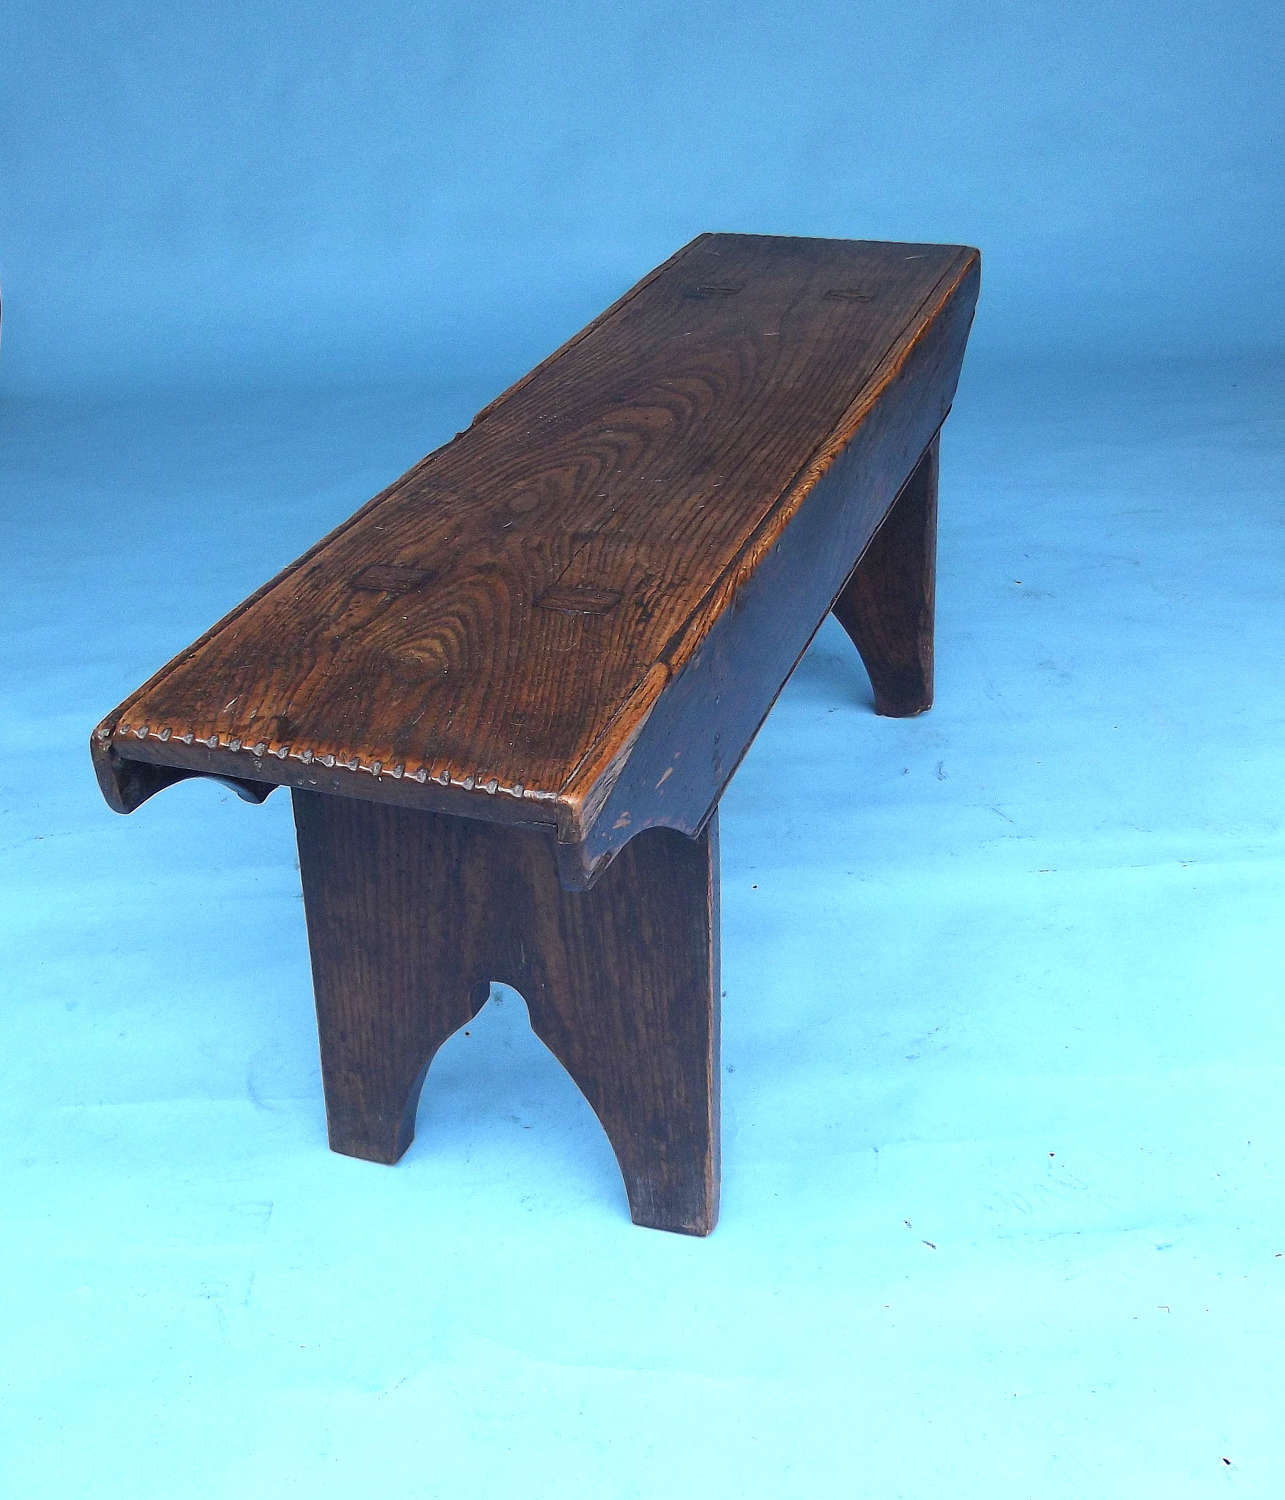 Early Furniture 19thc Ash Bench With Shaped End And Boarded Side C1800